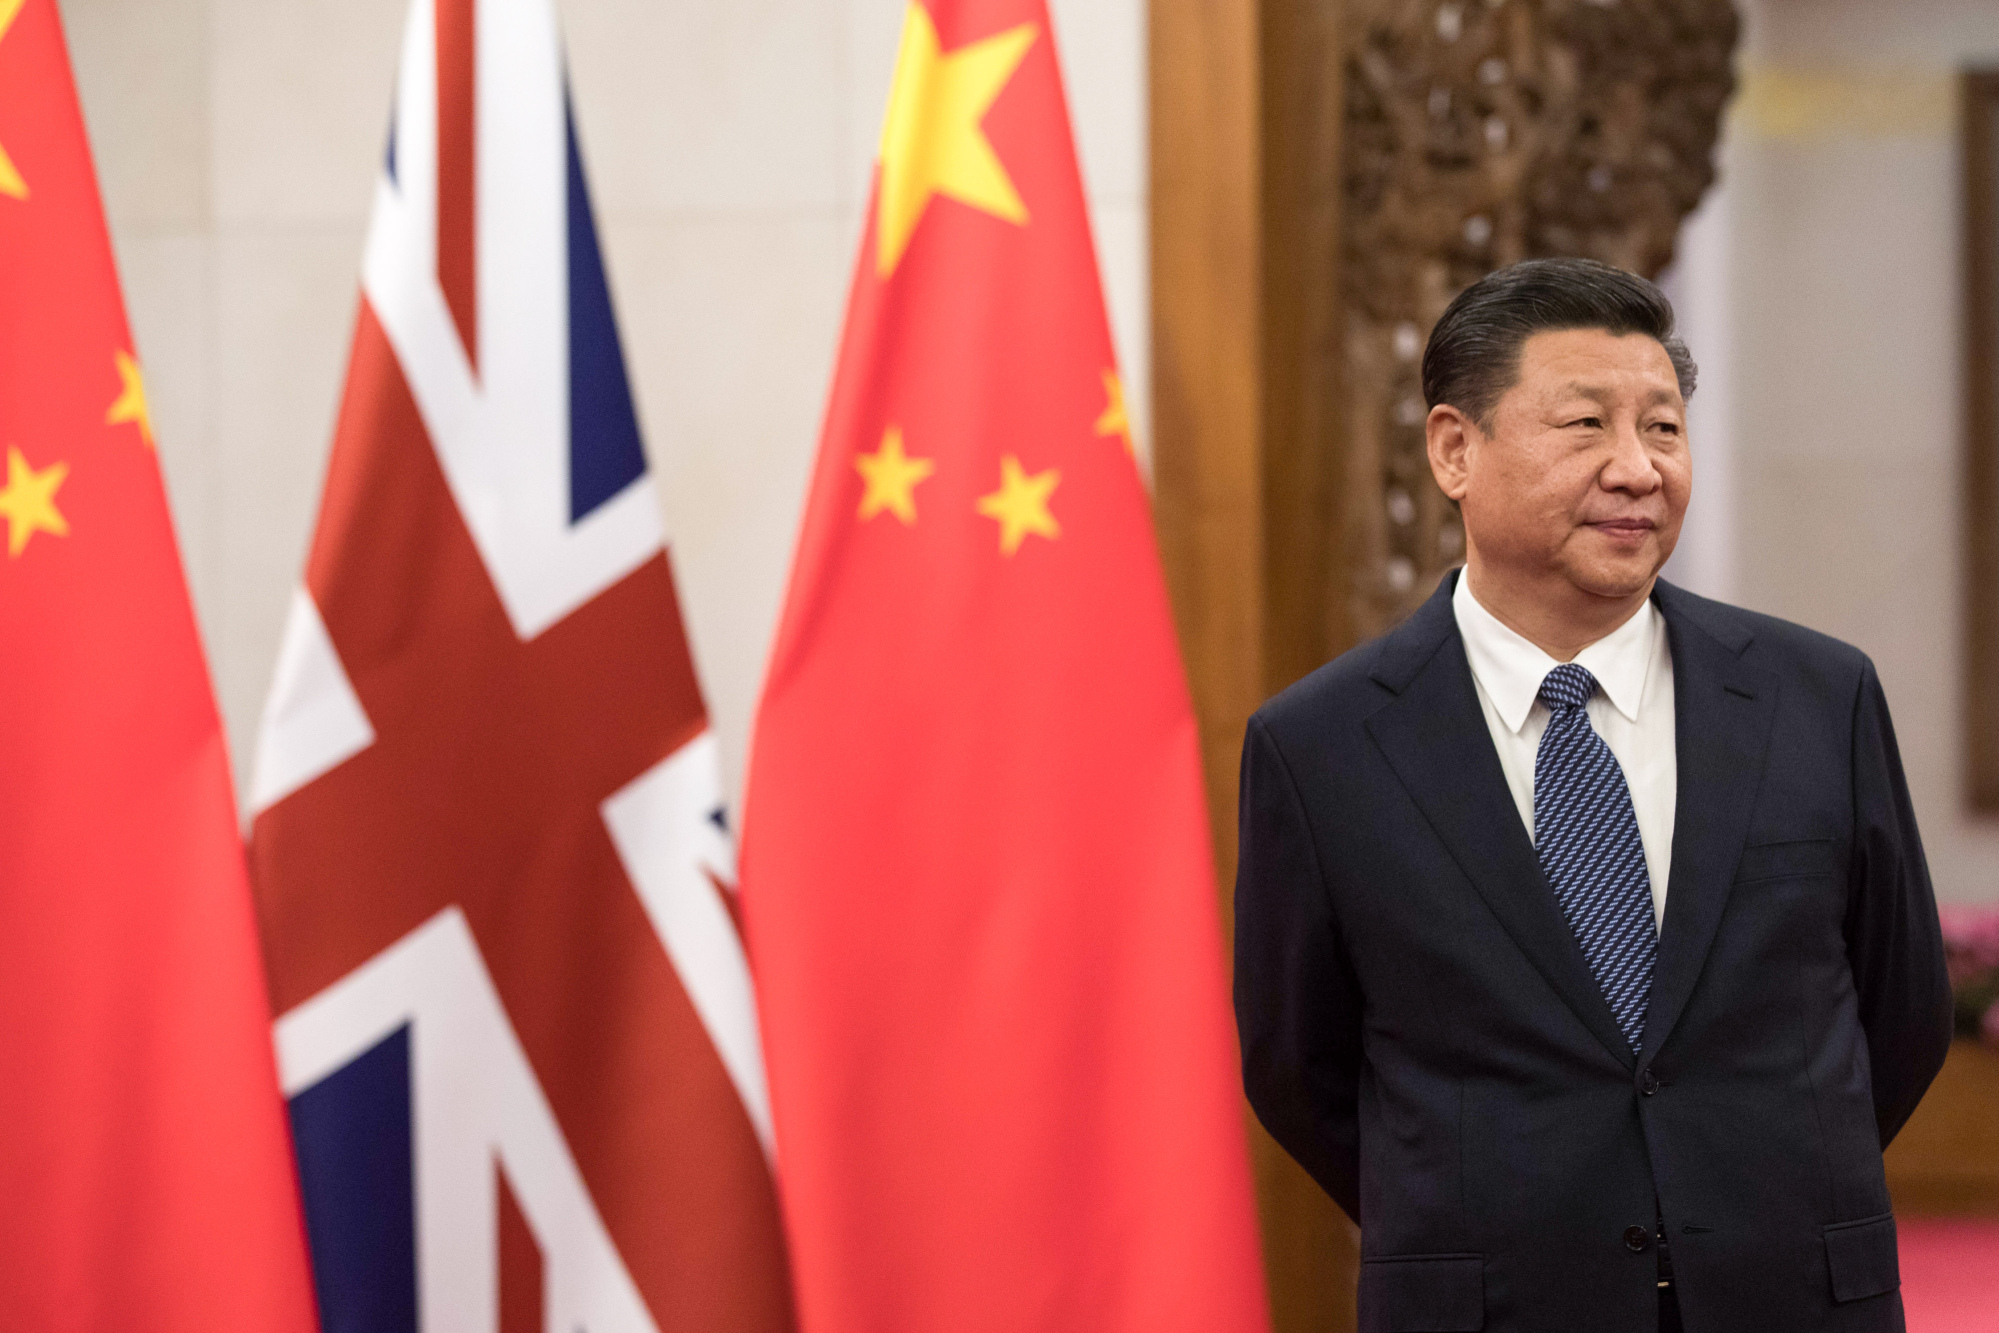 Xi Jinping during a visit by U.K. Prime Minister Theresa May in 2018.